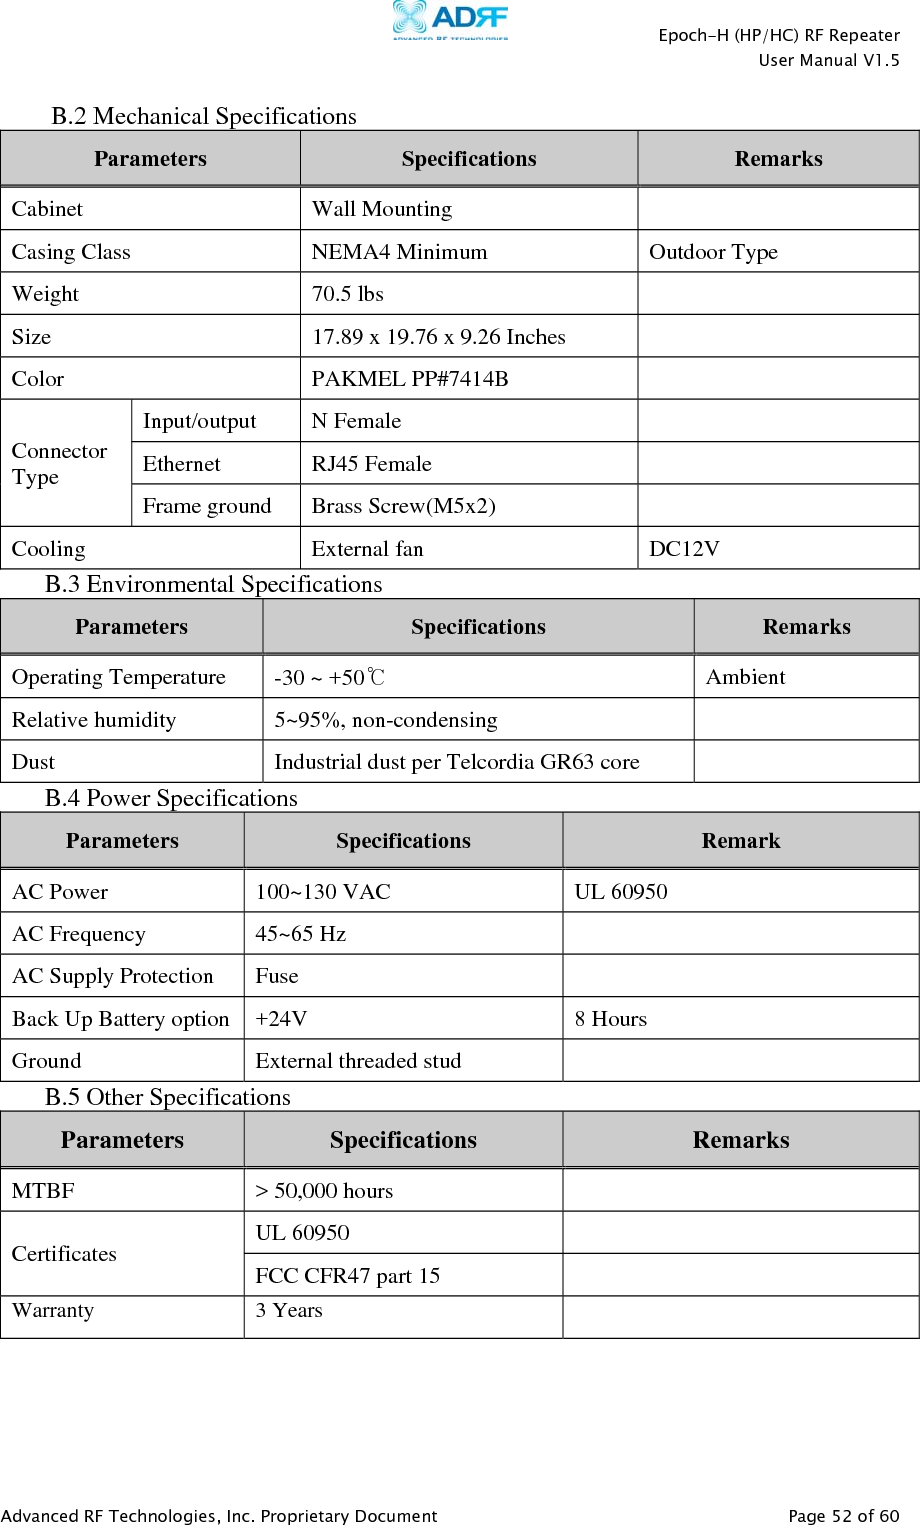    Epoch-H (HP/HC) RF Repeater  User Manual V1.5  Advanced RF Technologies, Inc. Proprietary Document   Page 52 of 60    B.2 Mechanical Specifications Parameters  Specifications  Remarks Cabinet Wall Mounting  Casing Class  NEMA4 Minimum  Outdoor Type Weight 70.5 lbs   Size  17.89 x 19.76 x 9.26 Inches   Color PAKMEL PP#7414B  Connector Type Input/output N Female   Ethernet RJ45 Female   Frame ground  Brass Screw(M5x2)   Cooling External fan DC12V B.3 Environmental Specifications Parameters  Specifications  Remarks Operating Temperature  -30 ~ +50℃ Ambient Relative humidity  5~95%, non-condensing  Dust  Industrial dust per Telcordia GR63 core   B.4 Power Specifications Parameters  Specifications  Remark AC Power  100~130 VAC  UL 60950 AC Frequency  45~65 Hz   AC Supply Protection  Fuse   Back Up Battery option  +24V  8 Hours Ground  External threaded stud   B.5 Other Specifications Parameters  Specifications  Remarks MTBF  &gt; 50,000 hours   Certificates  UL 60950   FCC CFR47 part 15   Warranty 3 Years    